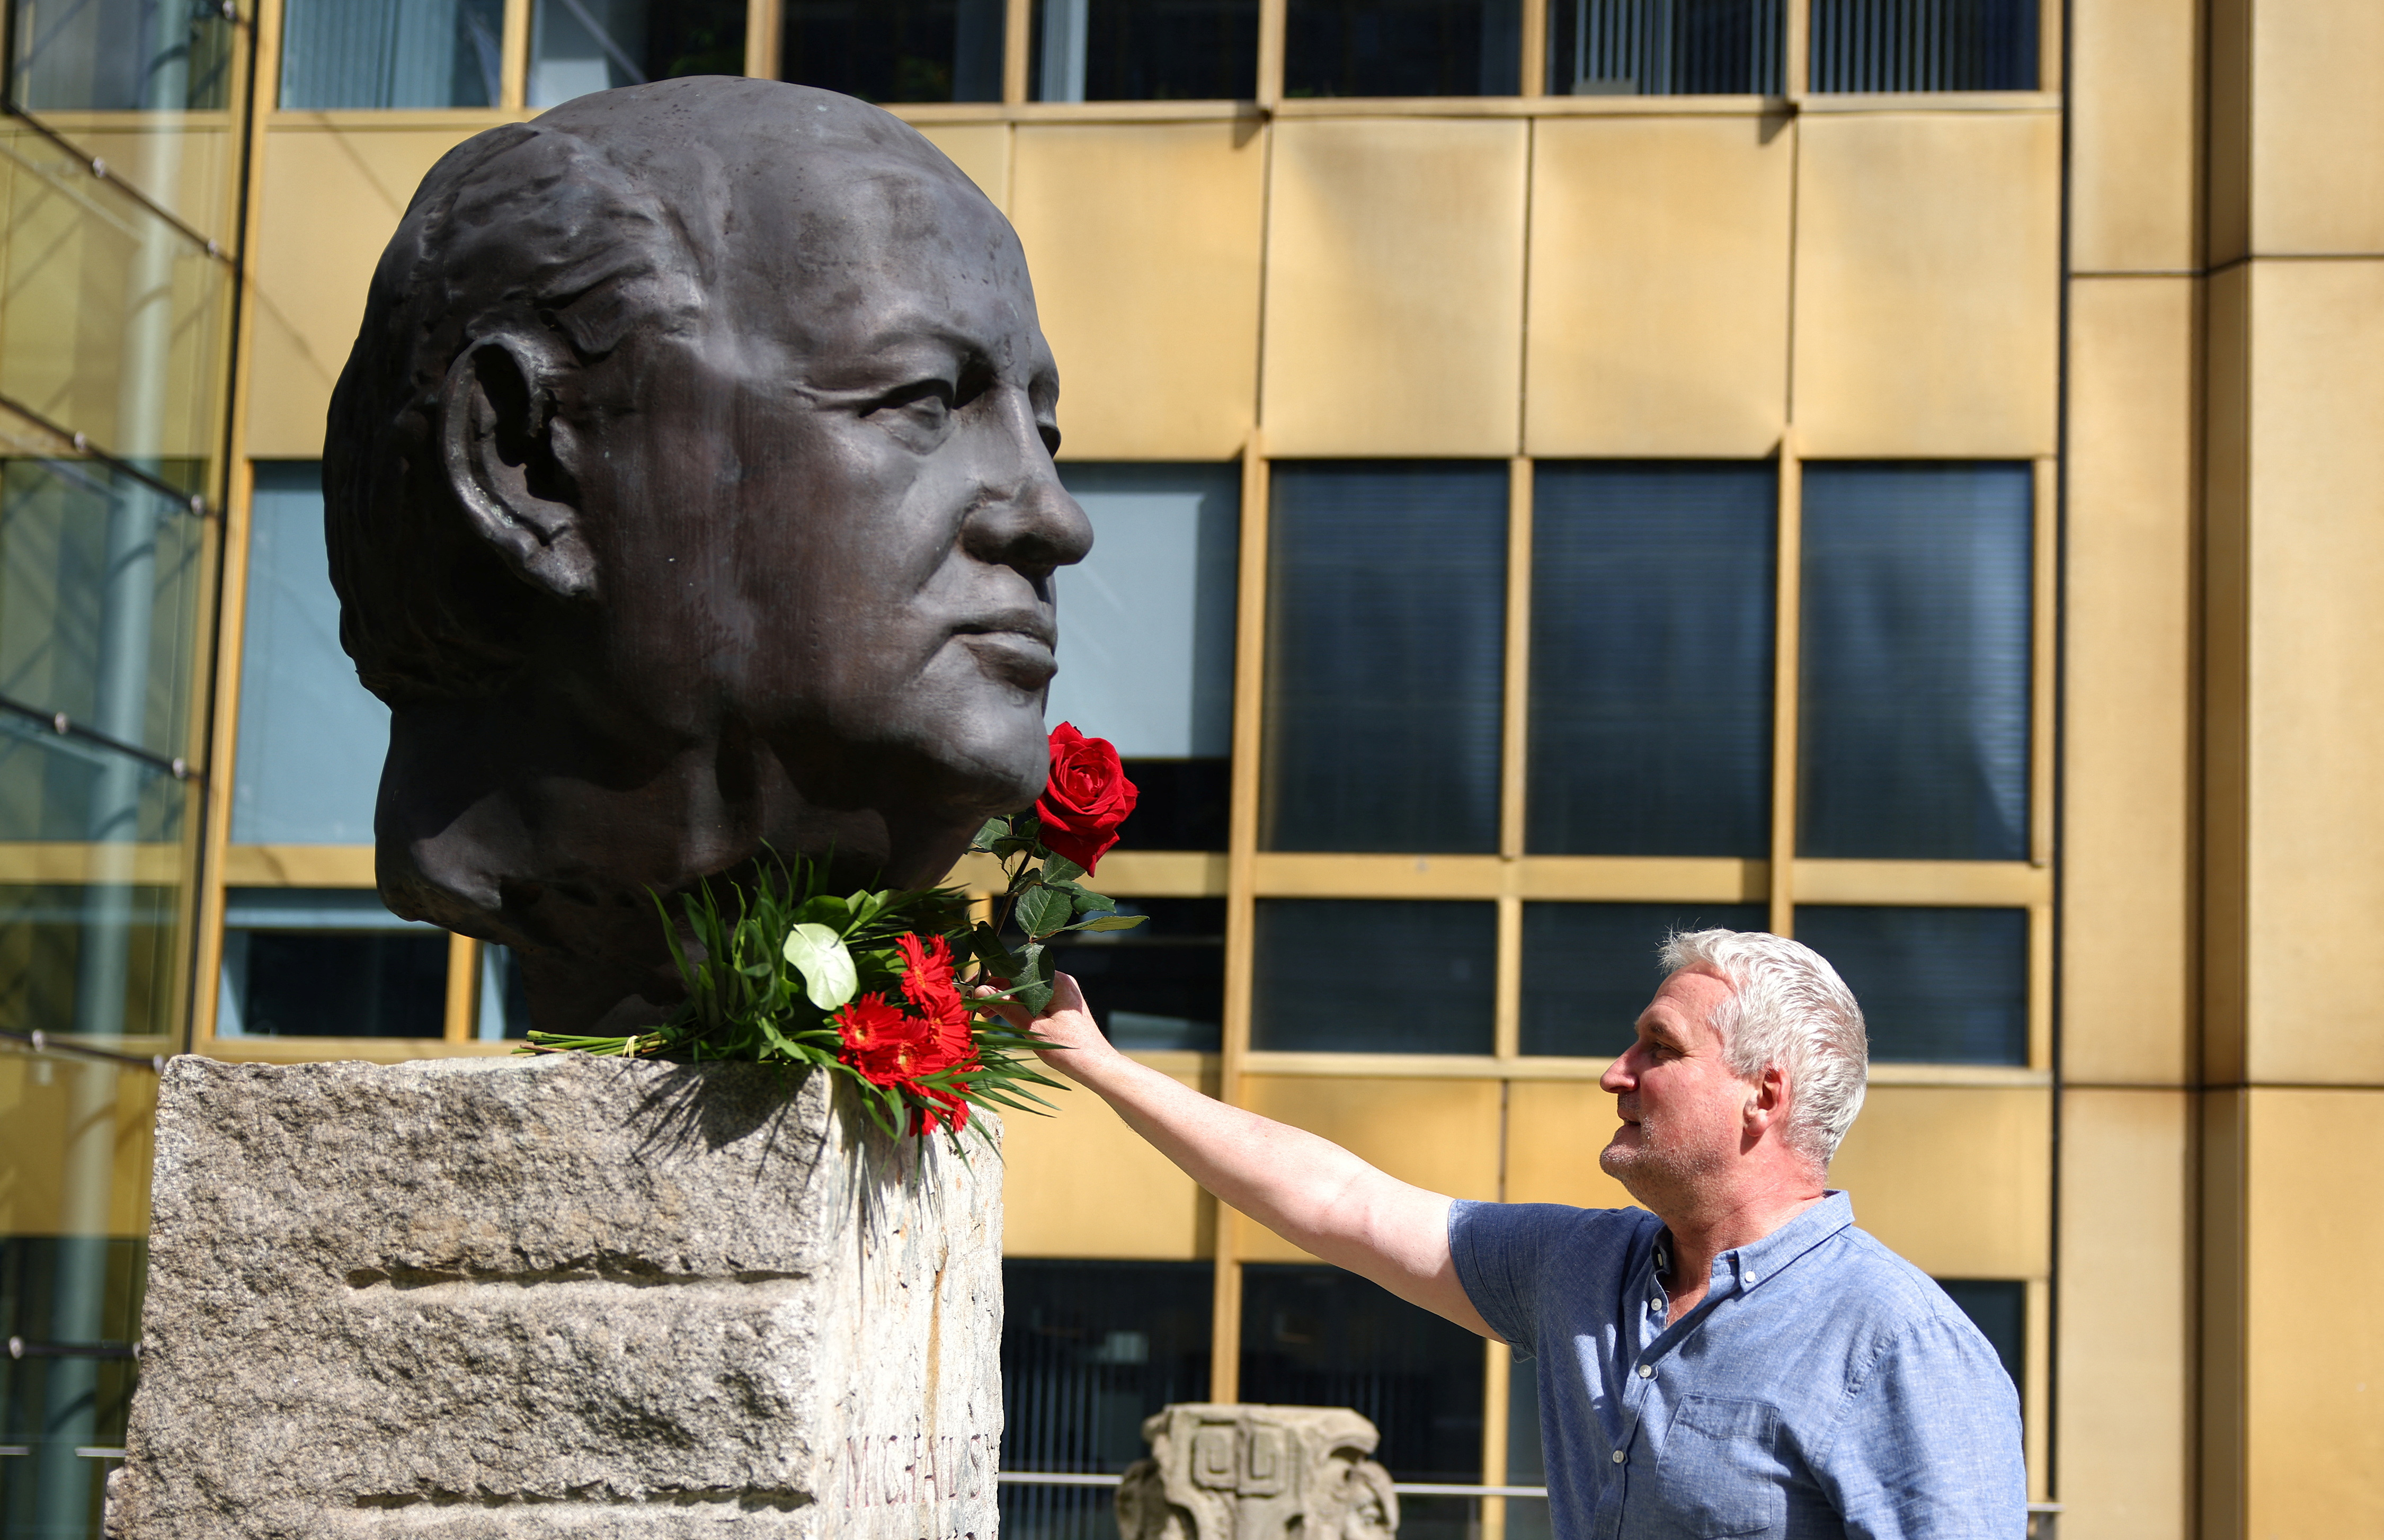 Sculpture of the final leader of the Soviet Union Mikhail Gorbachev in Berlin